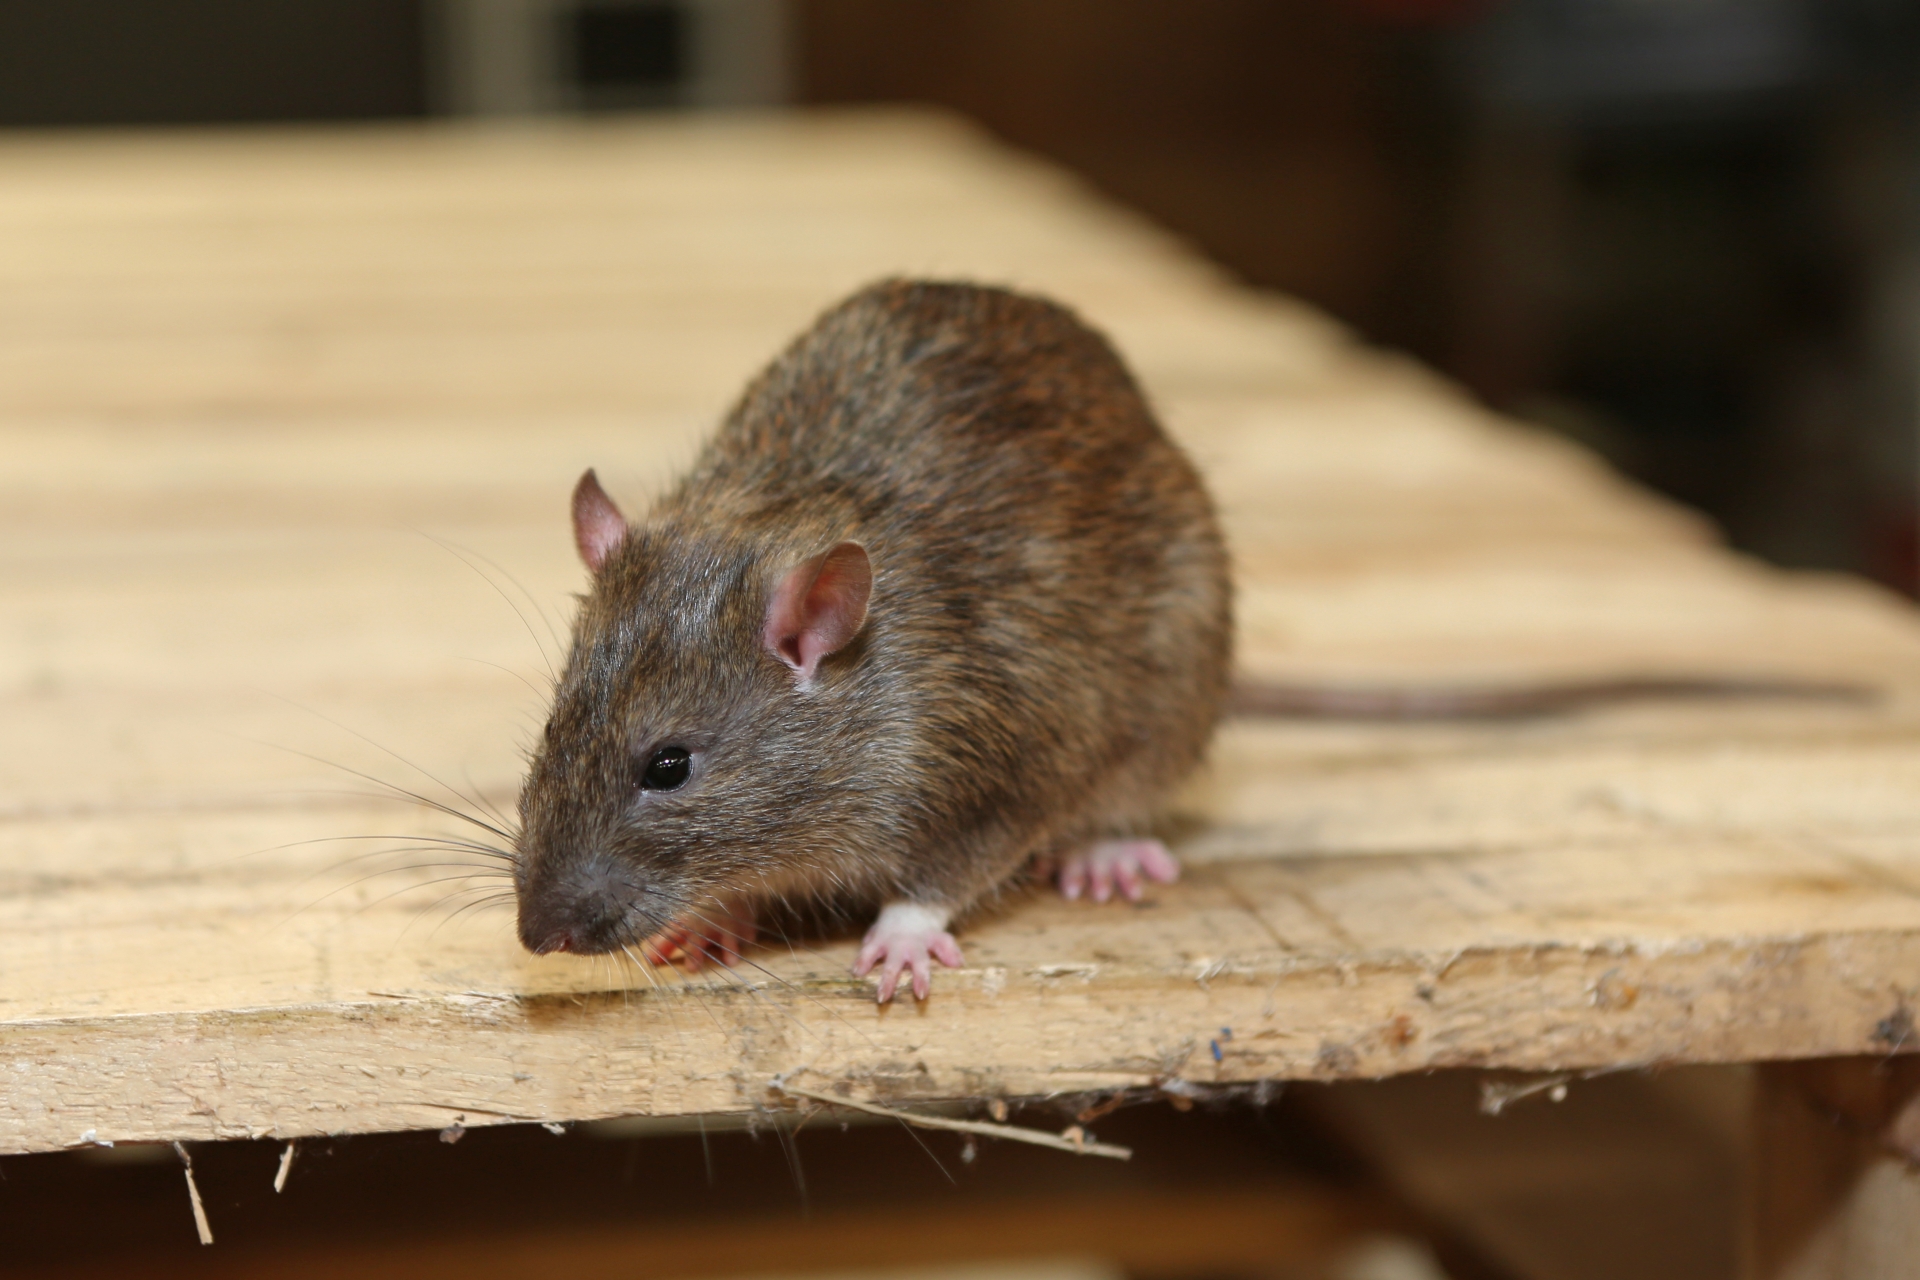 Rat extermination, Pest Control in Falconwood, Welling, DA16. Call Now 020 8166 9746